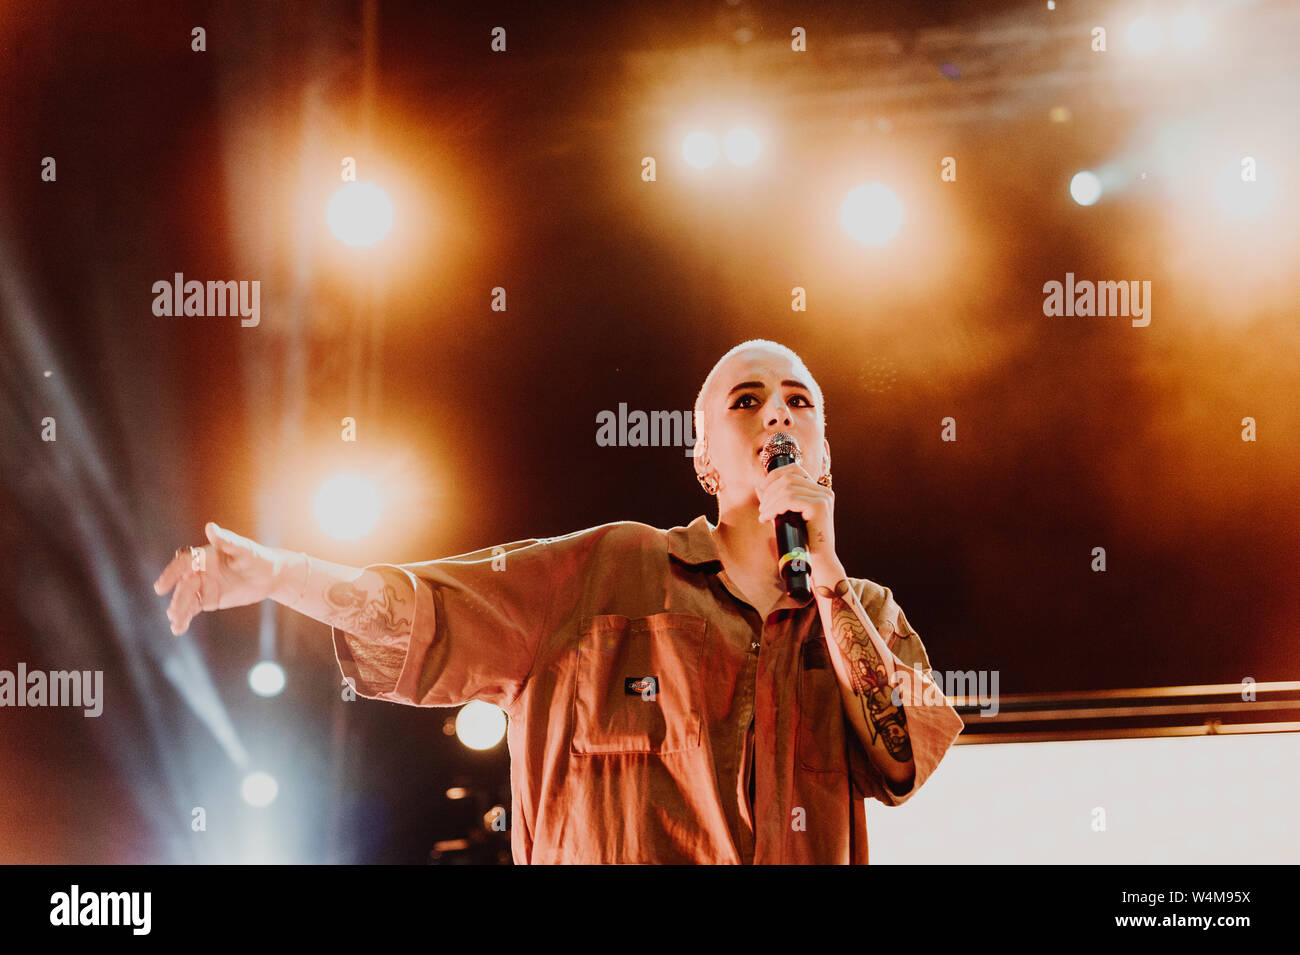 Turin, Italy, 19 July 2019. Coma Cose perform live at GruVillage Festival © Giulia Manfieri / Alamy Stock Photo